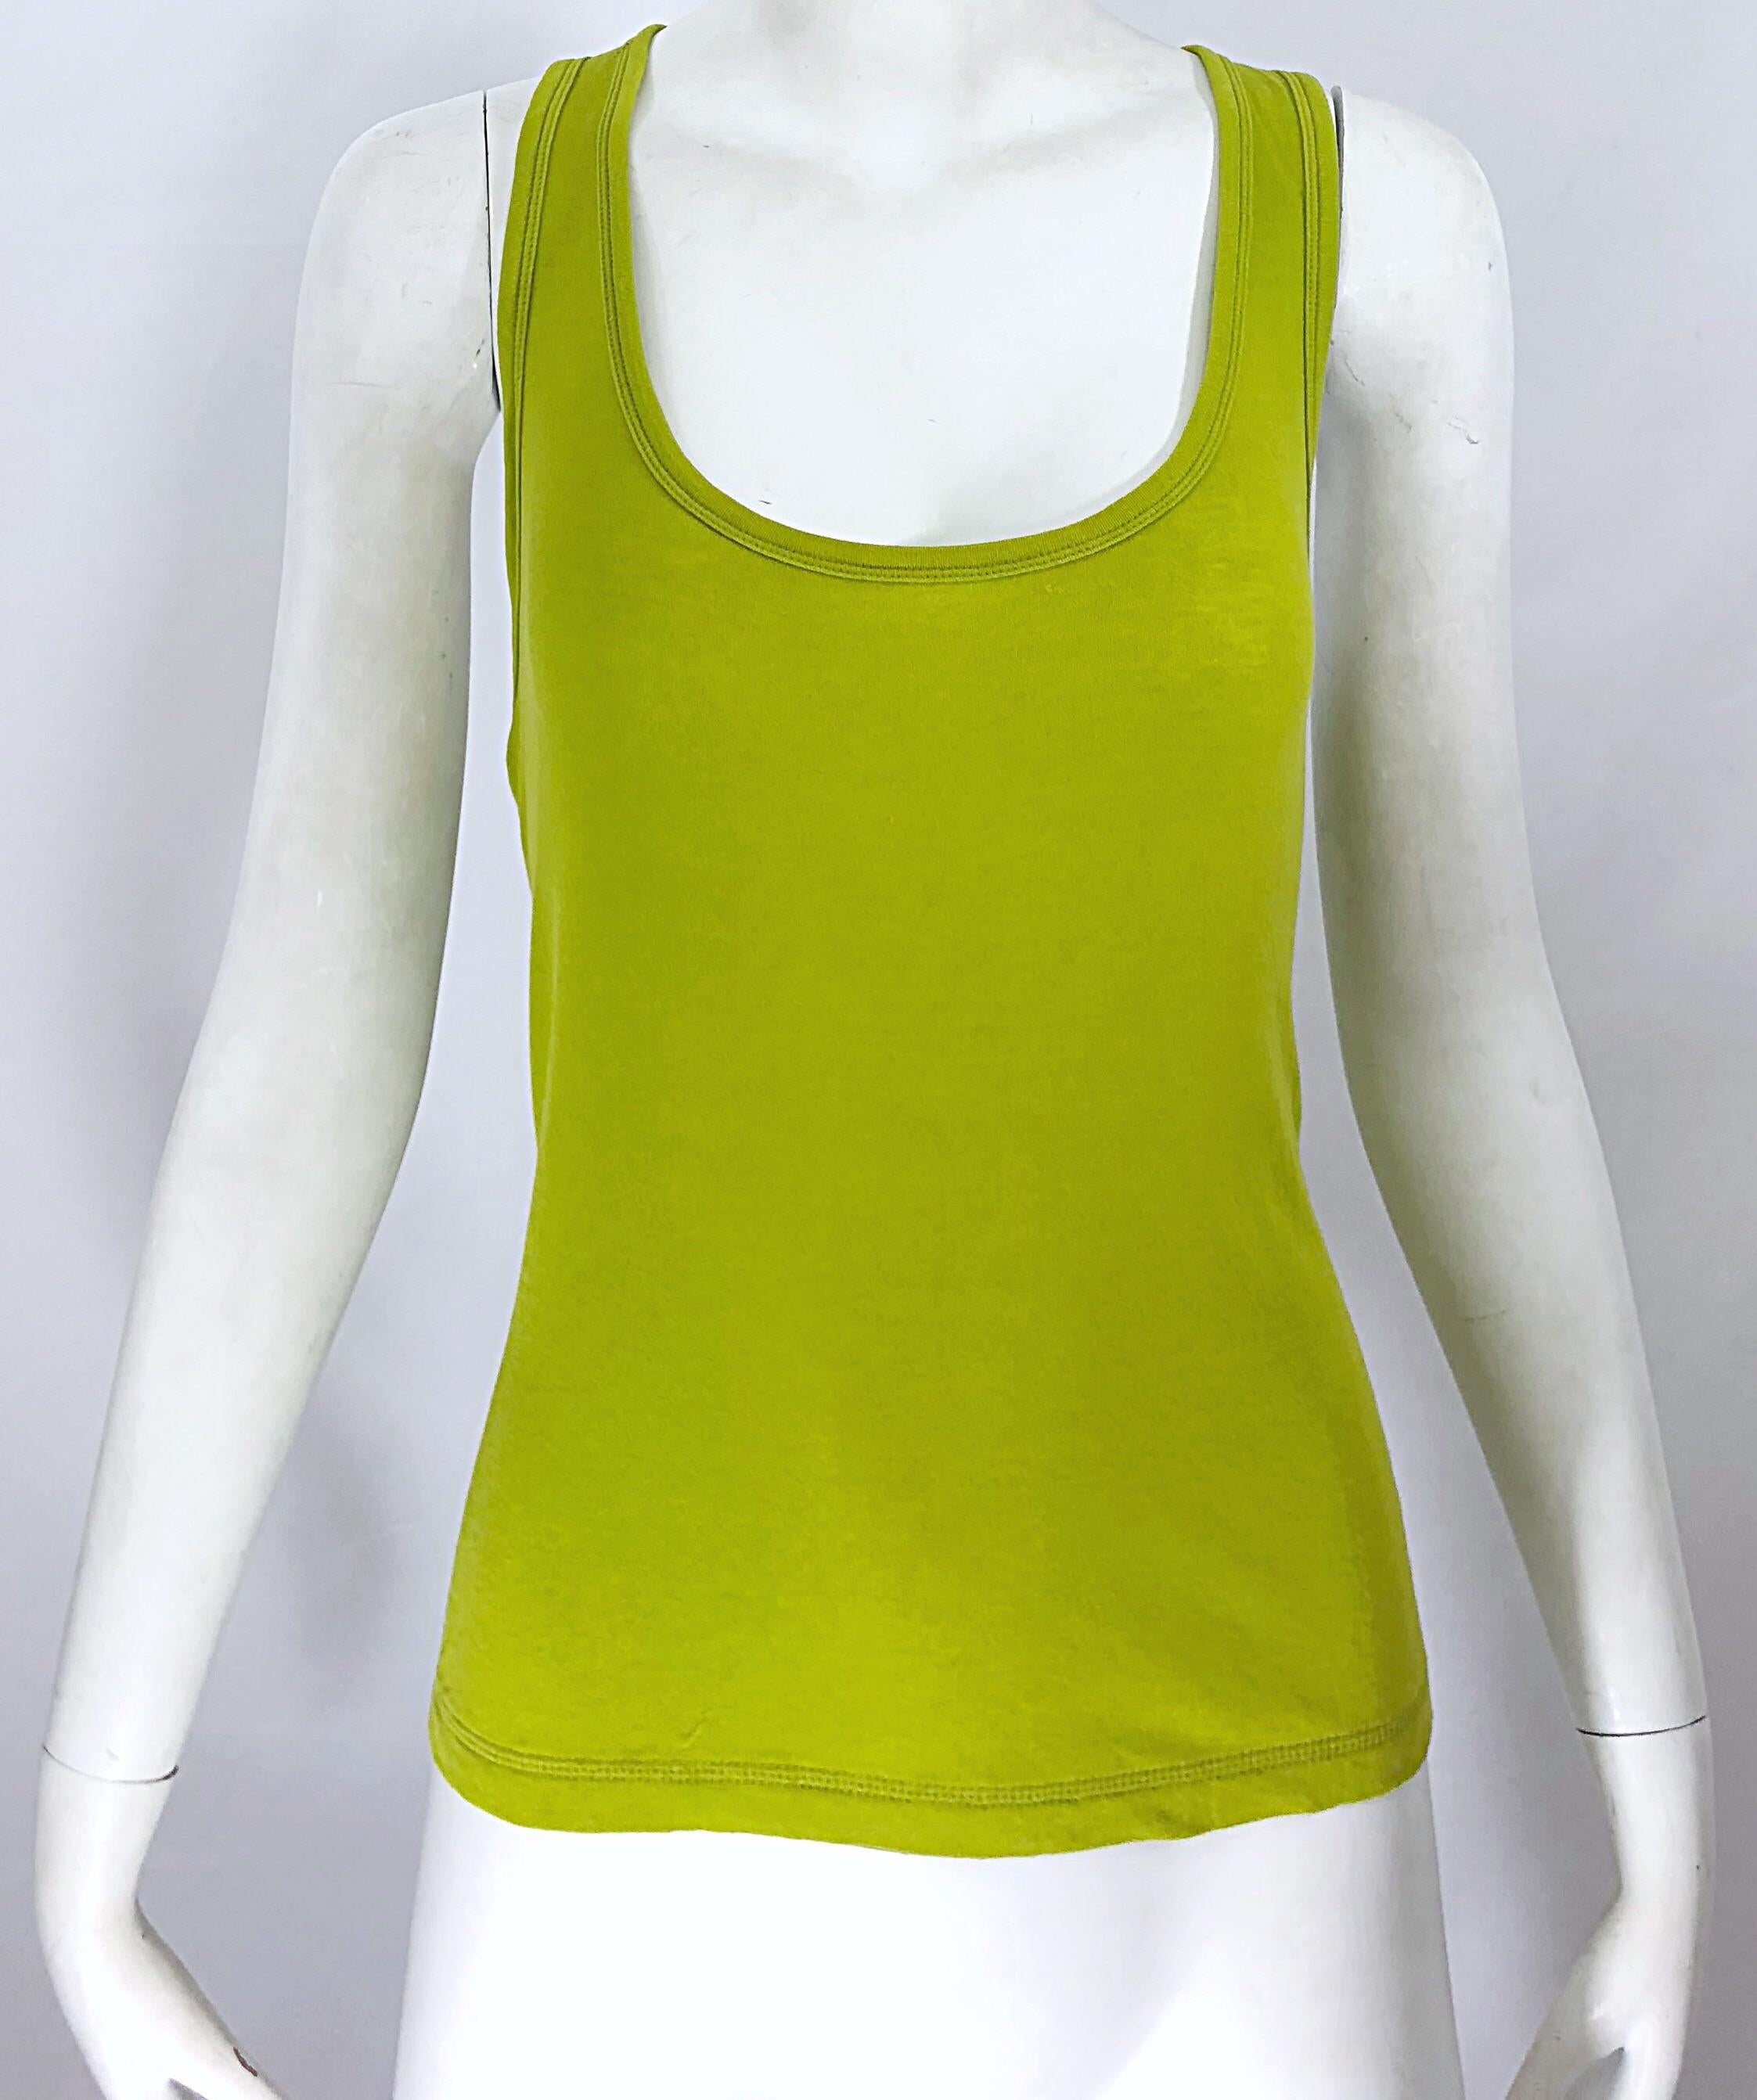 New Fall 2007 CHLOE chartreuse green racerback tank top! Label reads the whimsical color to be 